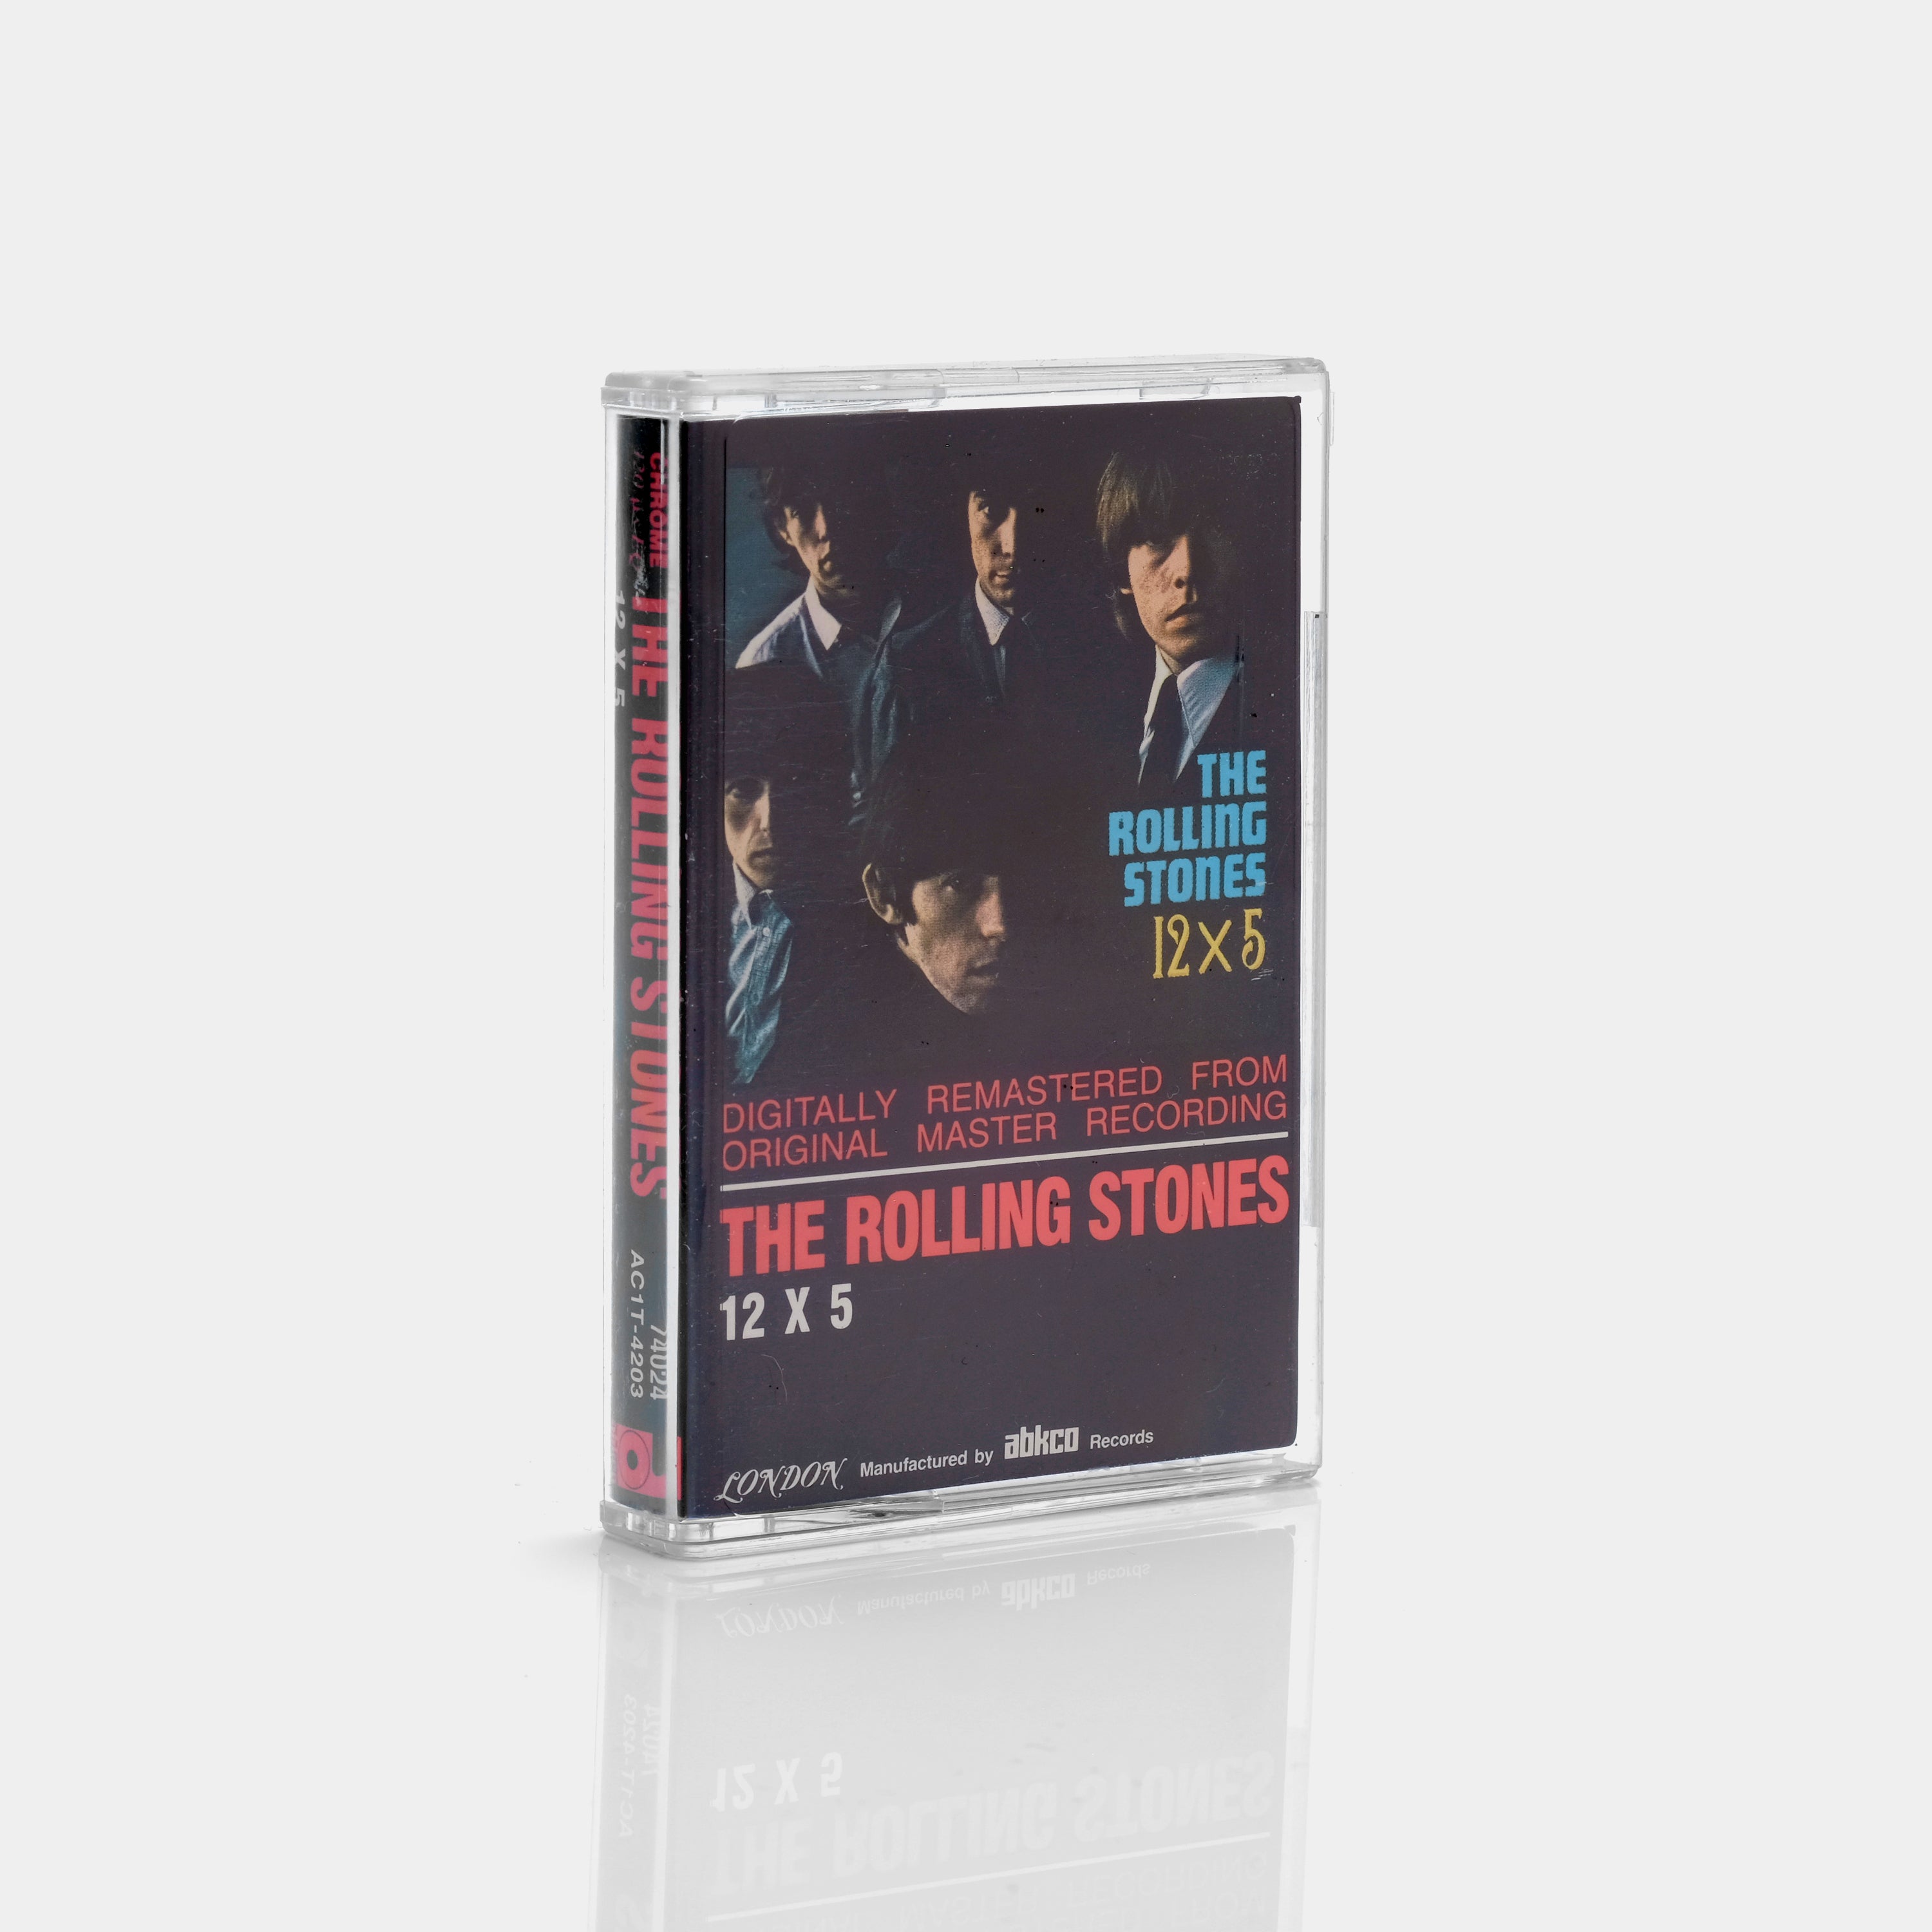 The Rolling Stones - 12 X 5 Cassette Tape